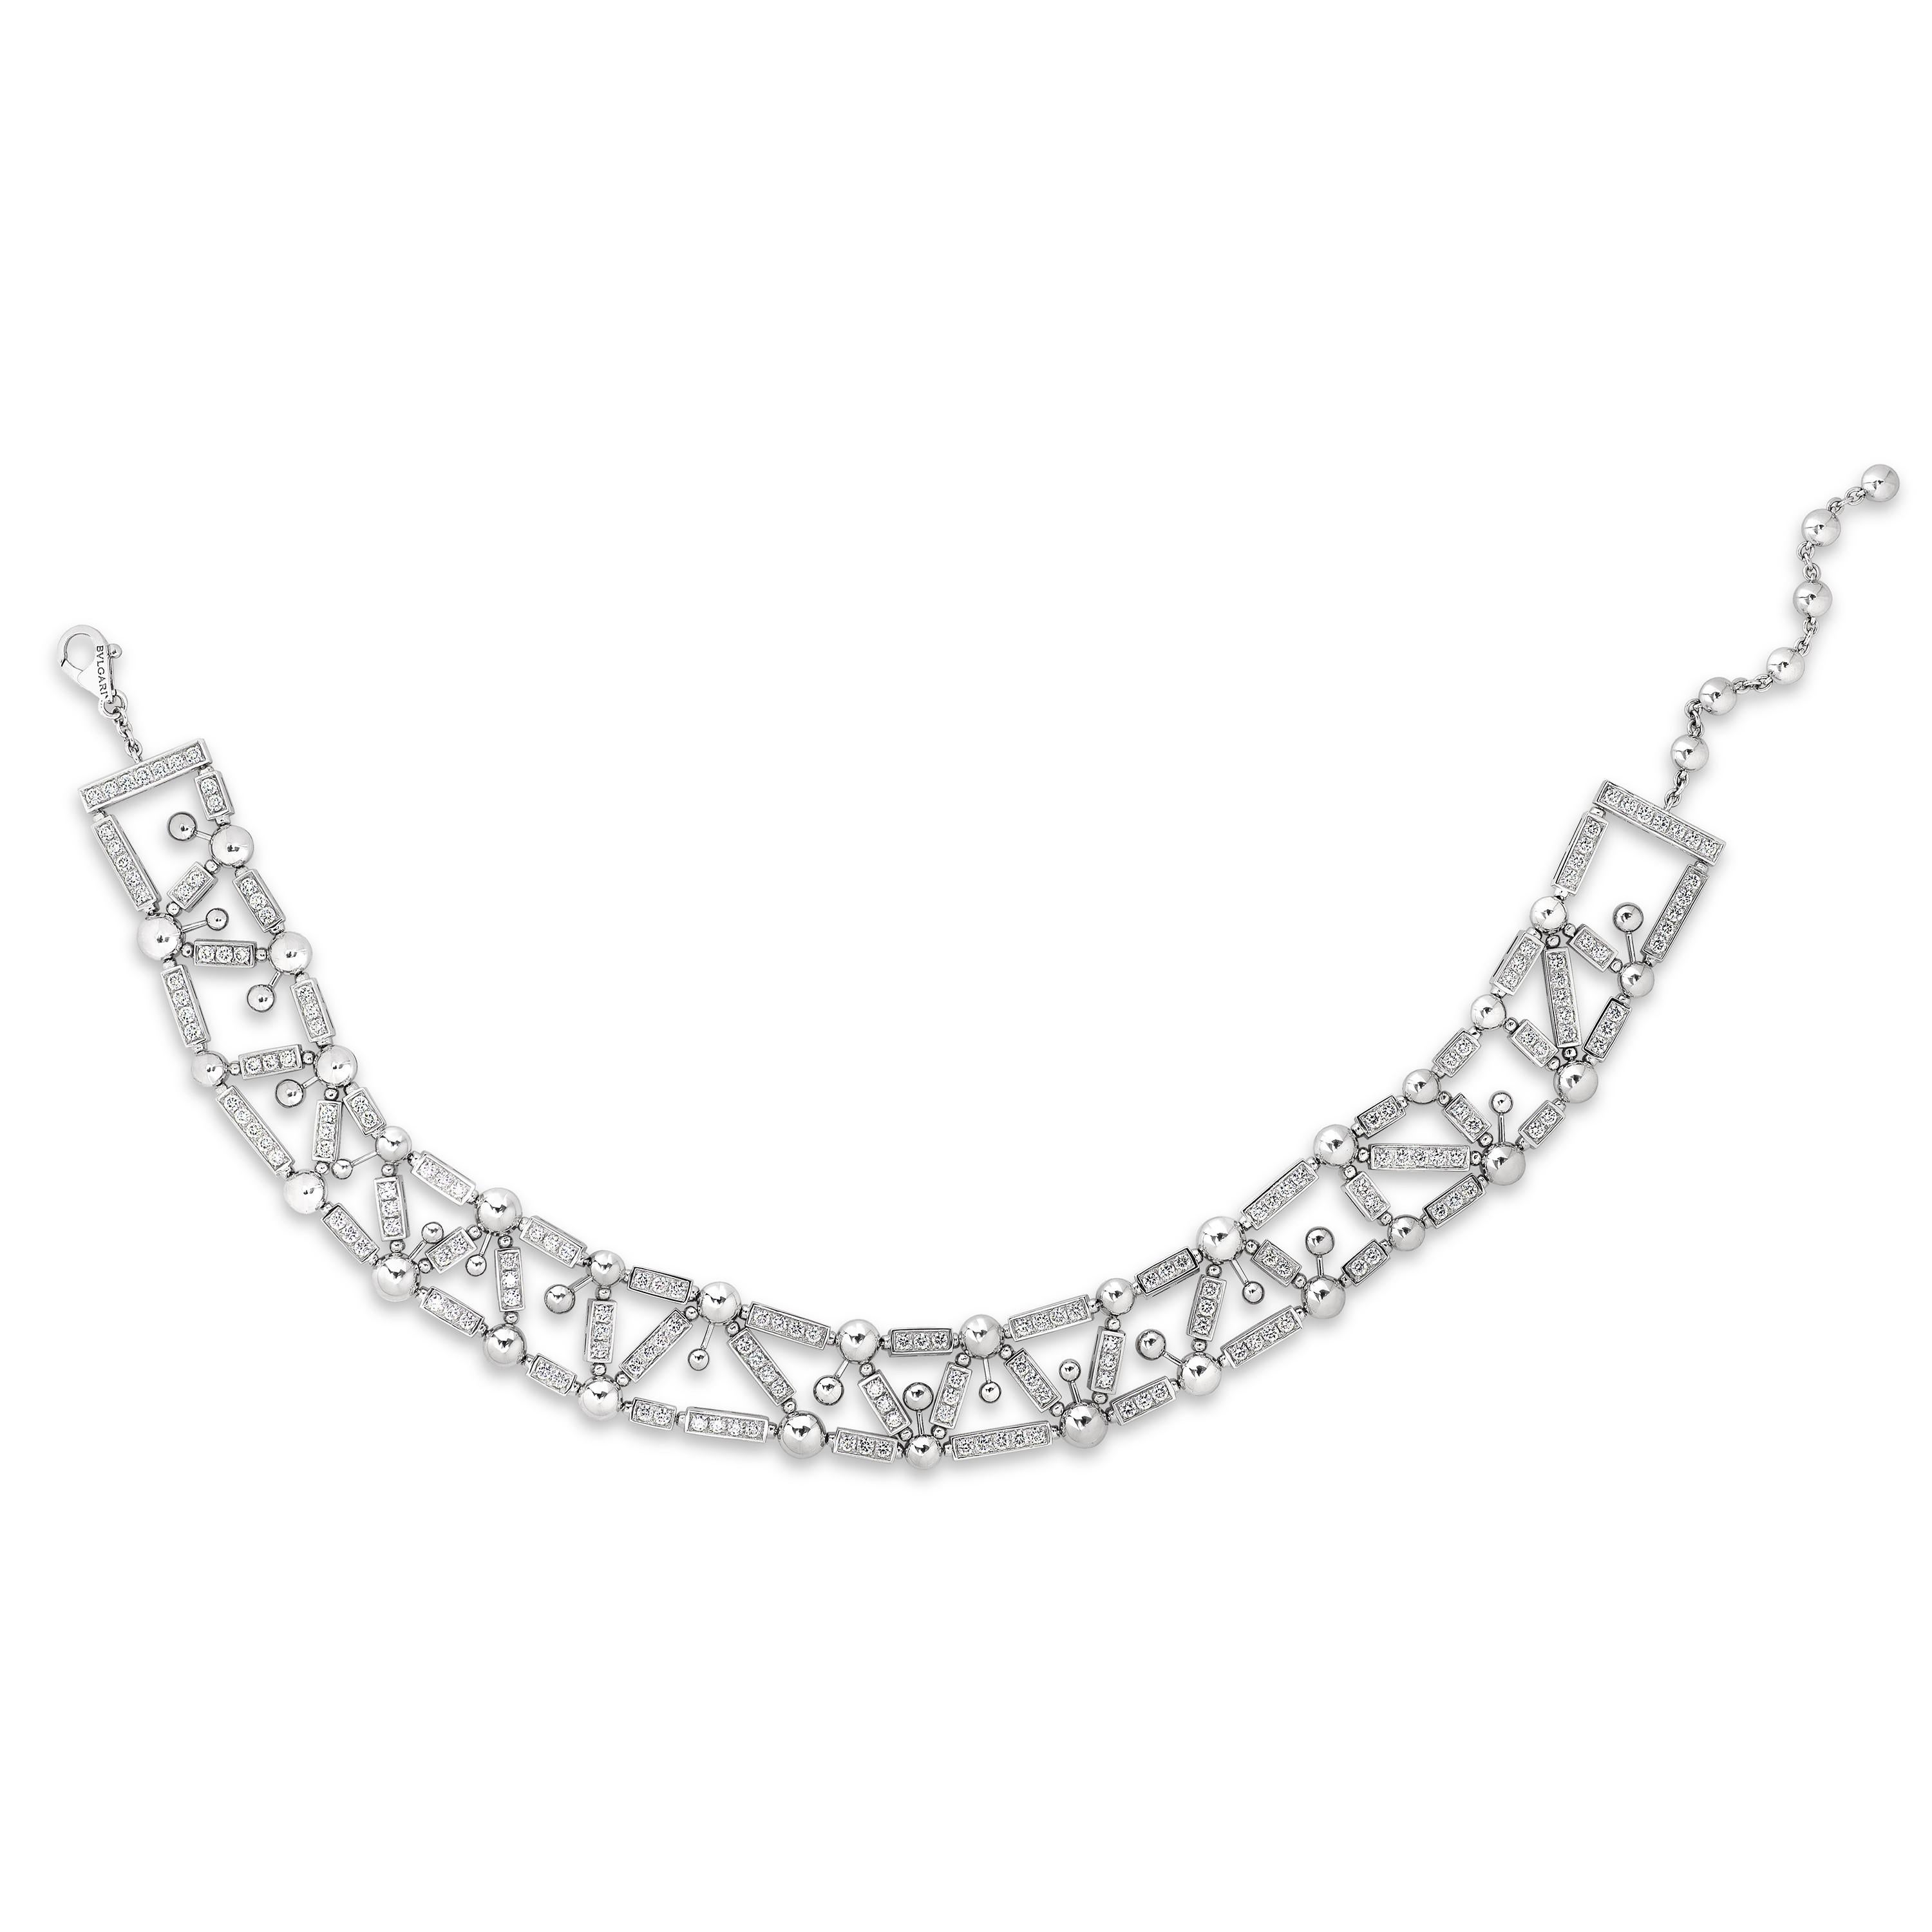 Bvlgari Fireworks collection diamond choker necklace and diamond bracelet set in 18 karat white gold. 

The choker necklace from this suite contains 185 round diamonds weighing approximately 9.25 carats with F-G color and VS clarity.  It weighs